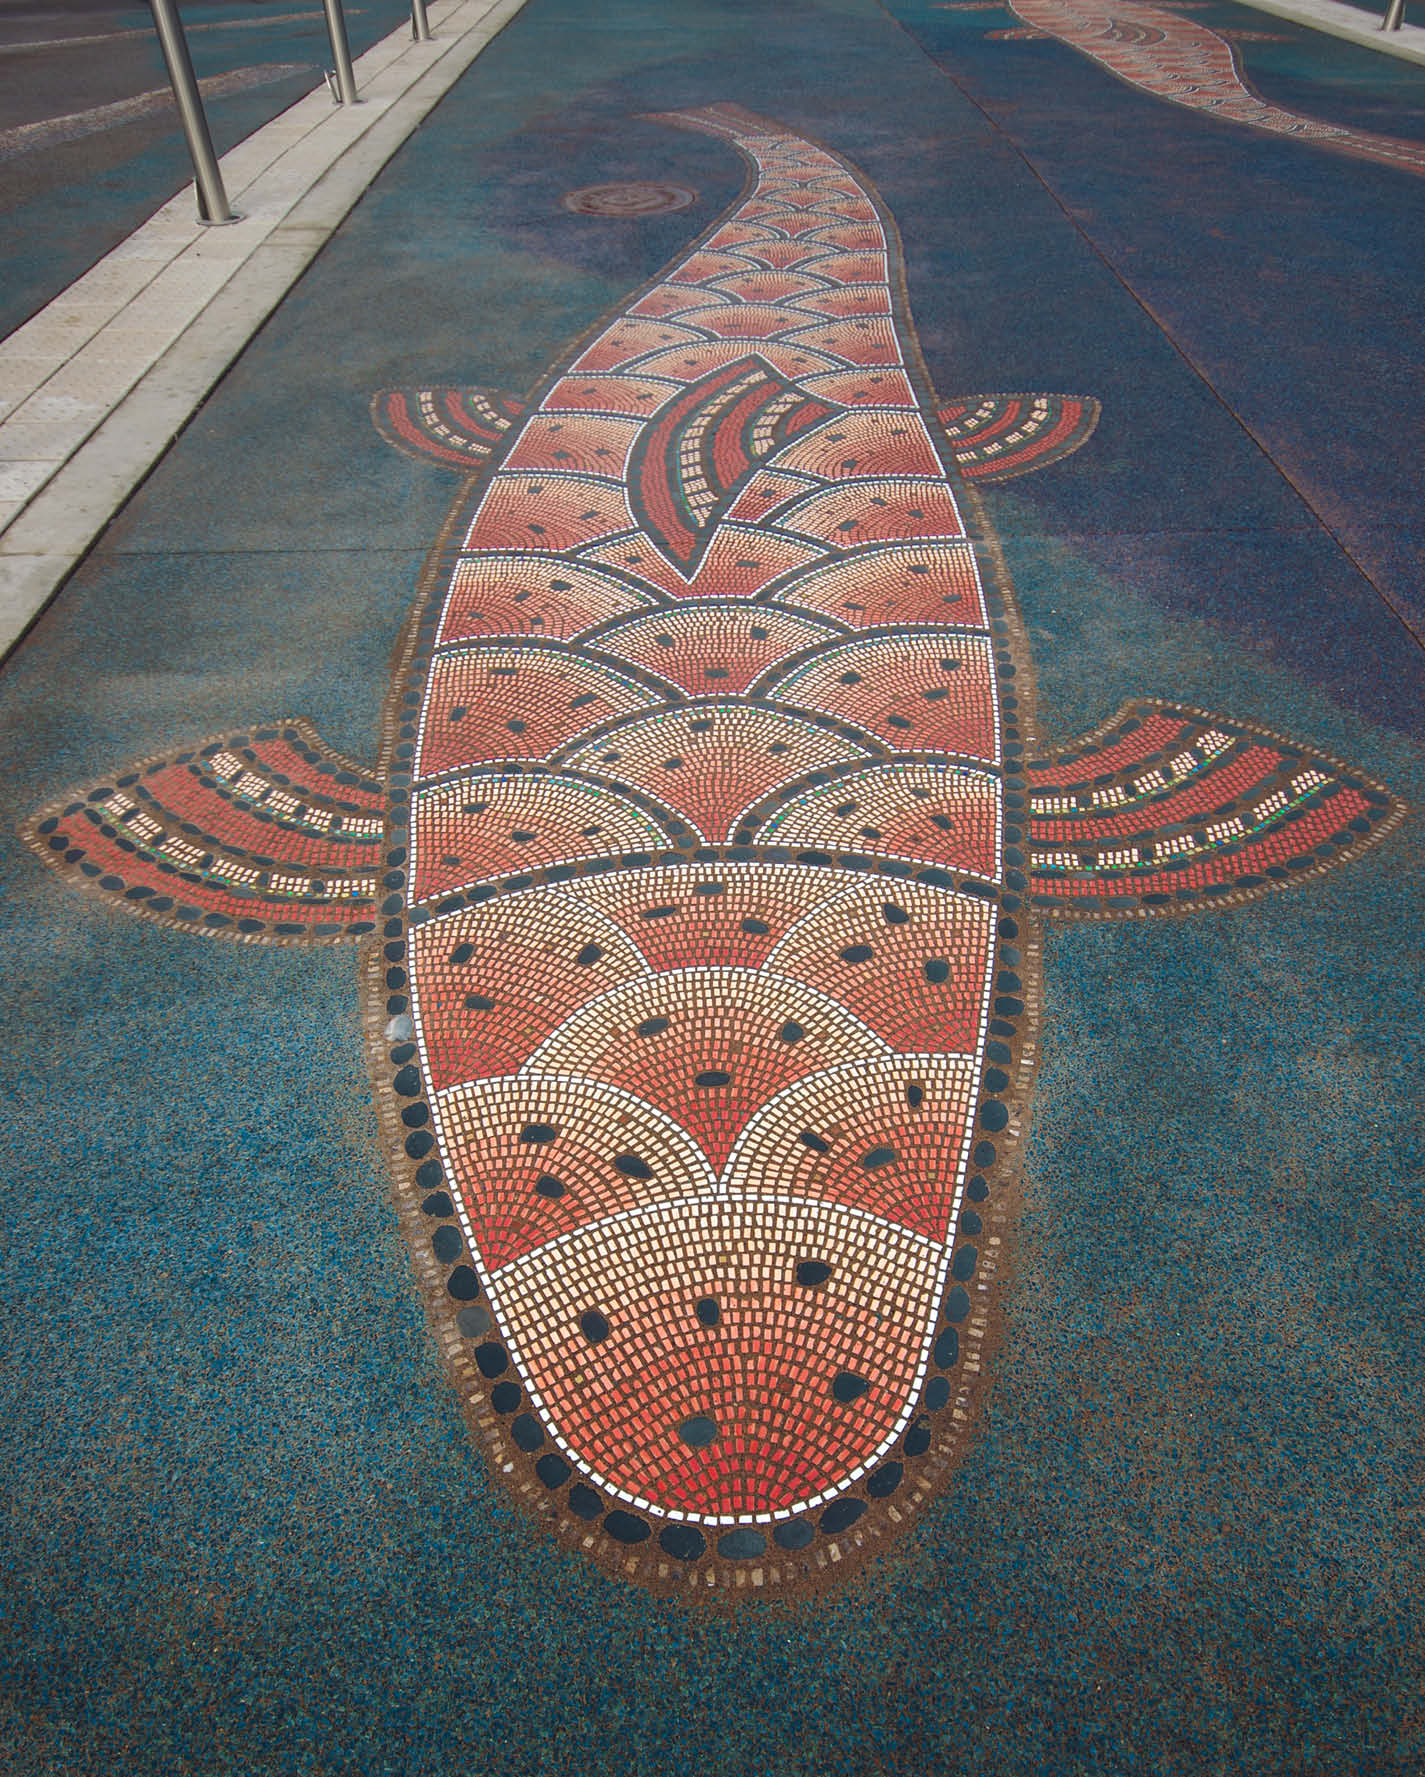 Orange and white Lithomosaic fish on concrete with blue surrounds